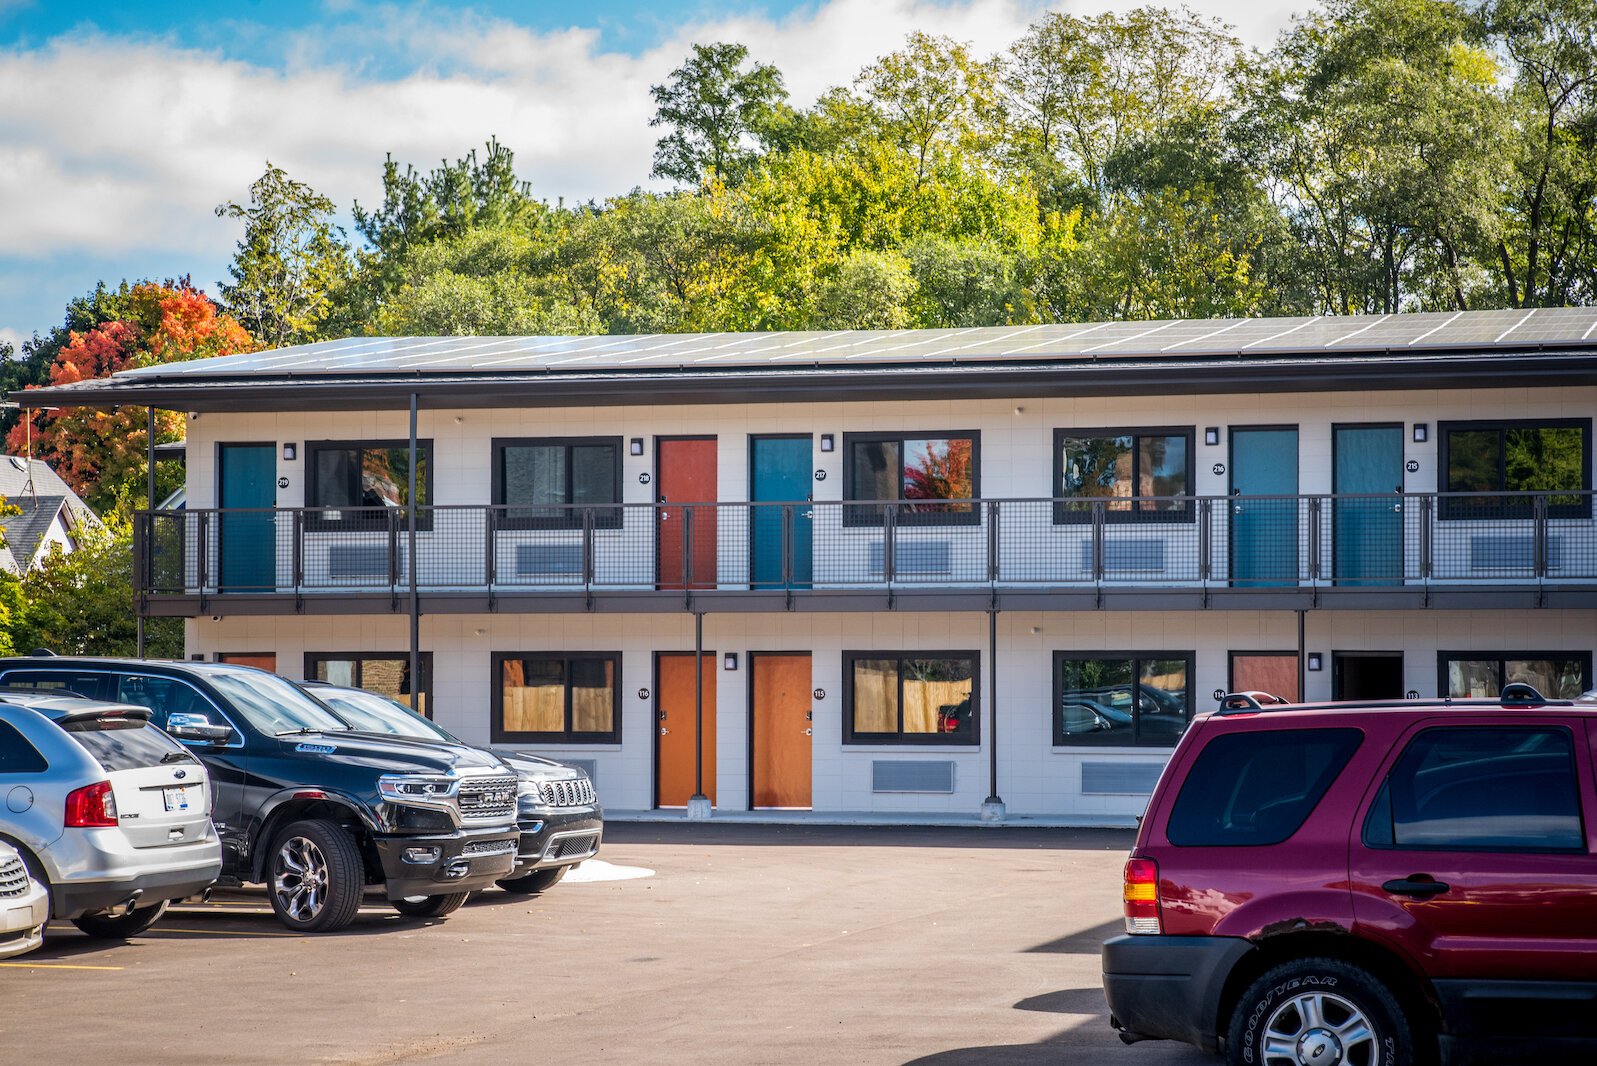 The LIFT Foundation has spent more than $8 million to purchase and renovate what was formerly the Knights Inn Motel at 1211 S. Westnedge Ave.  